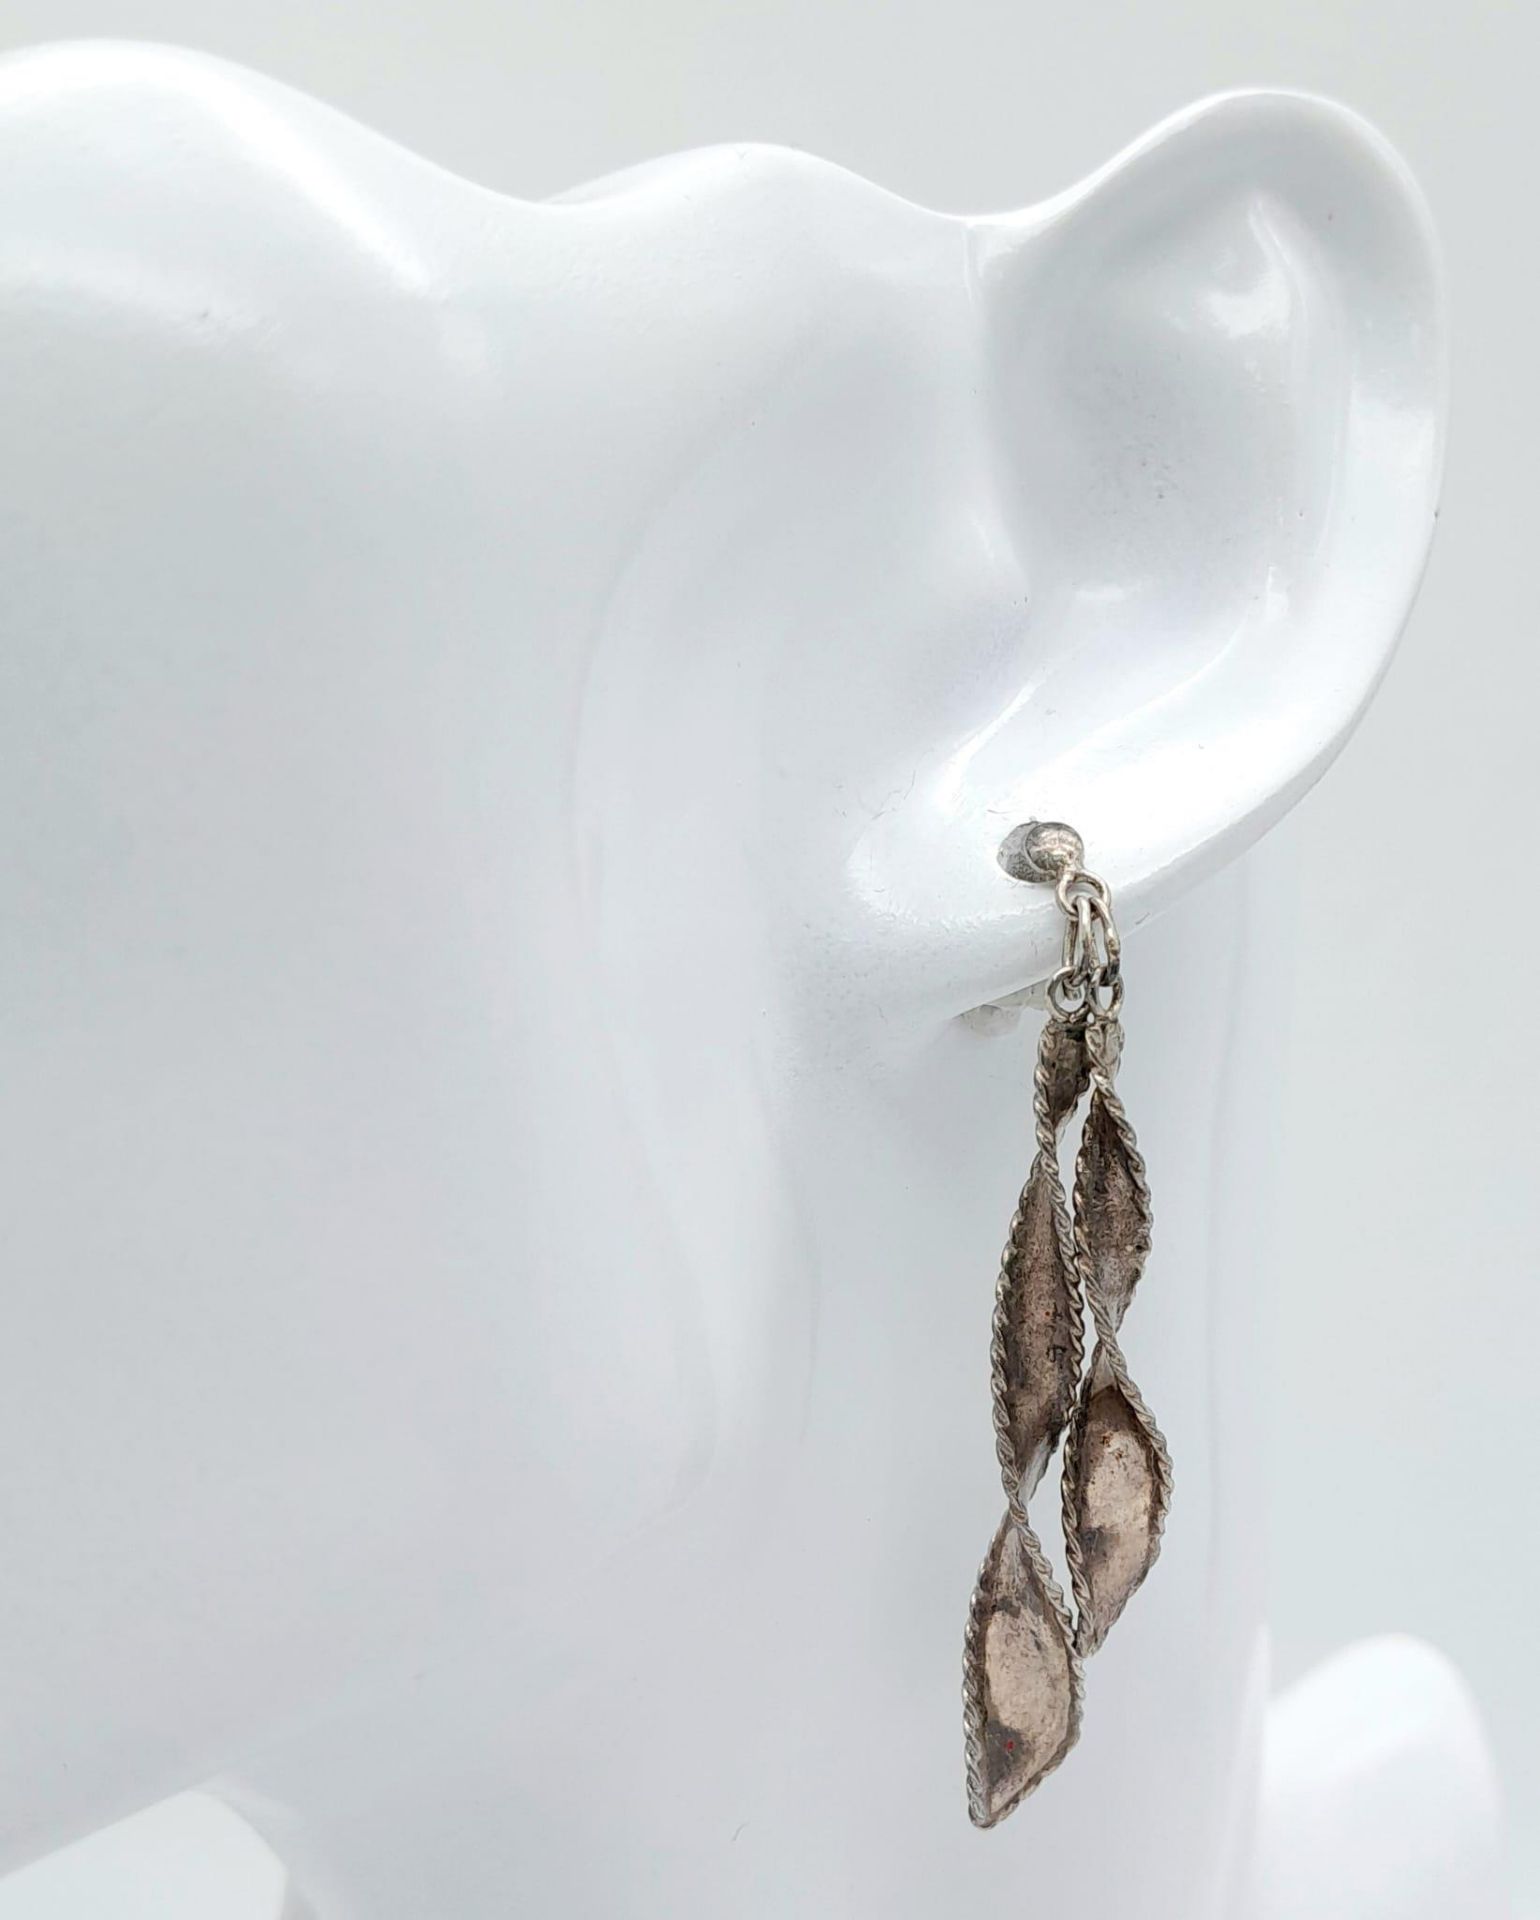 2X stylist pairs of vintage silver earrings. Total weight 6.6G. Please see photos for details. - Image 5 of 7